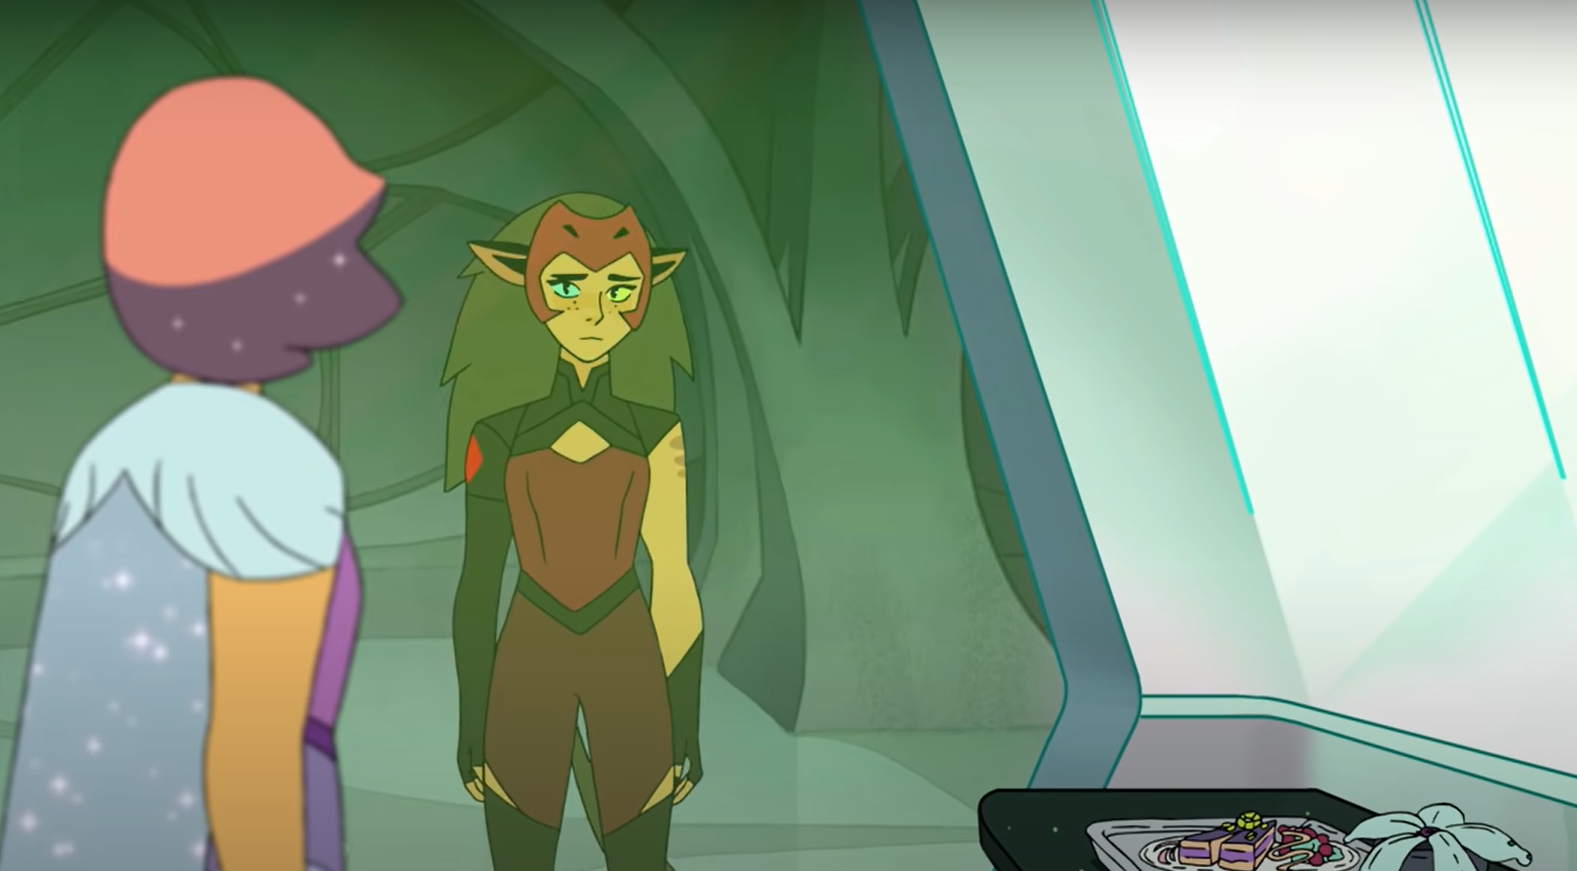 Catra visits Glimmer in her cell during the Season Five trailer for She-Ra and the Princesses of Power.